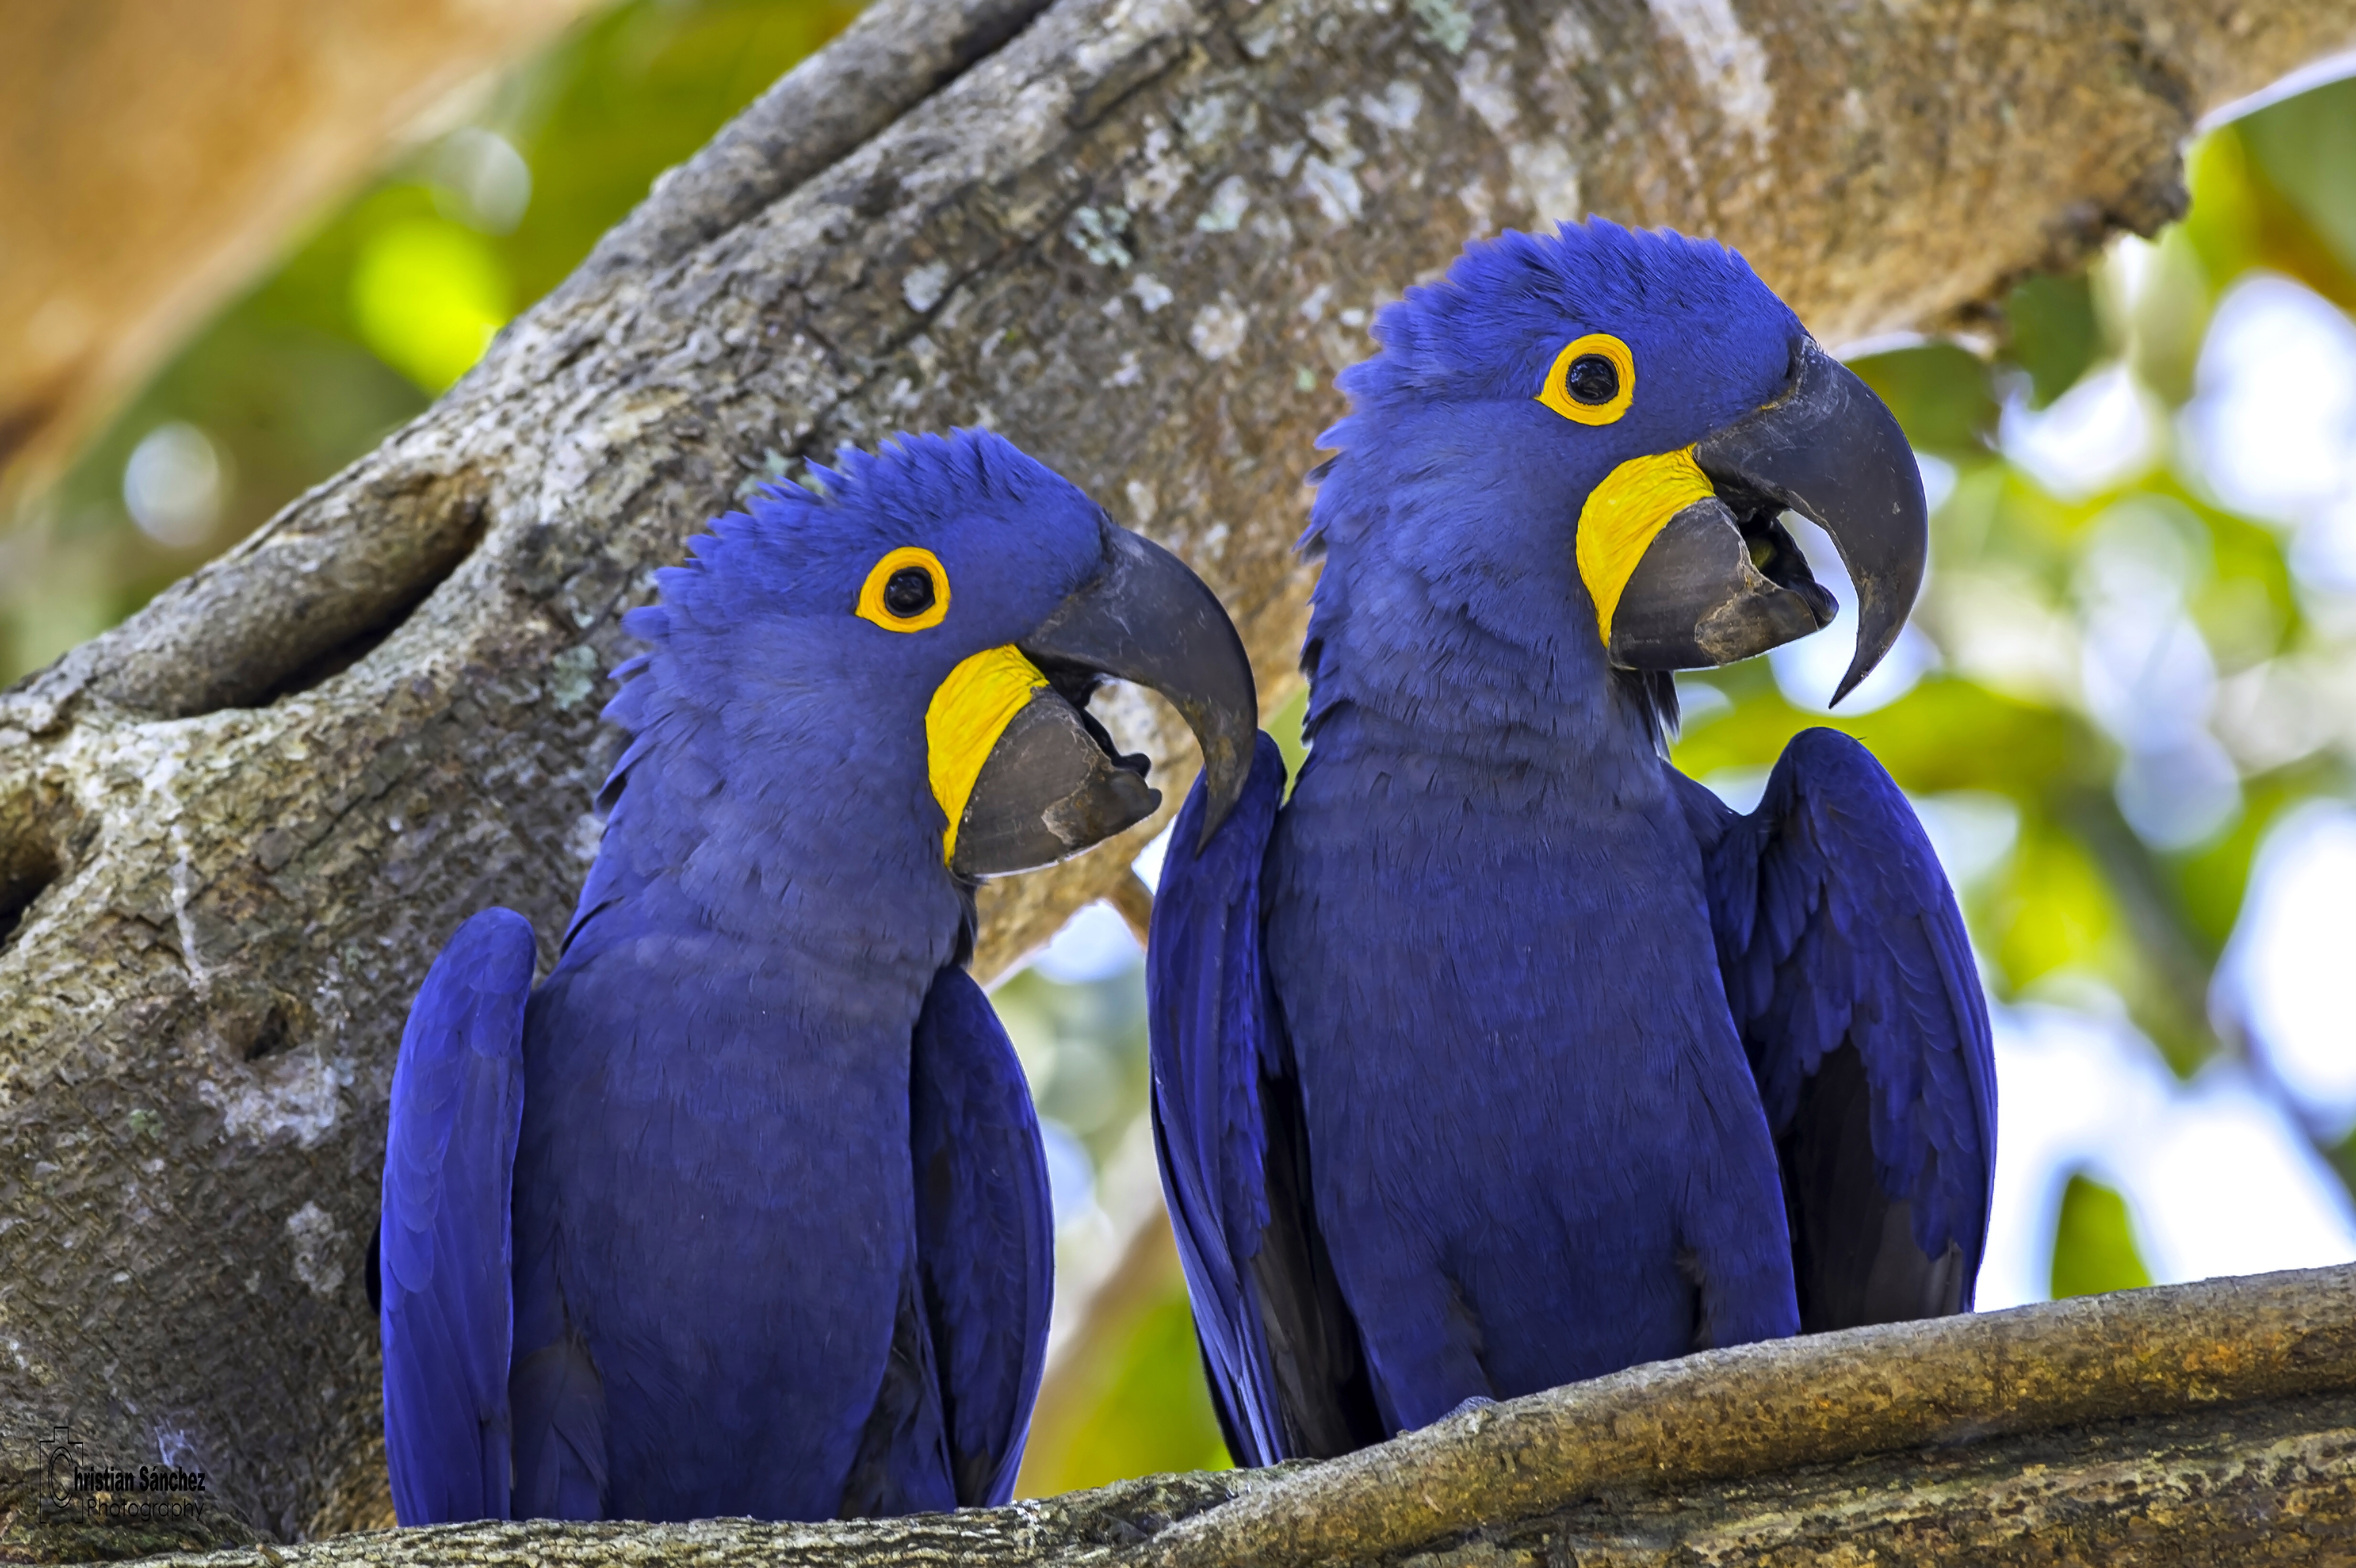 Two parrots of the hyacinth macaw breed are sitting on a ...